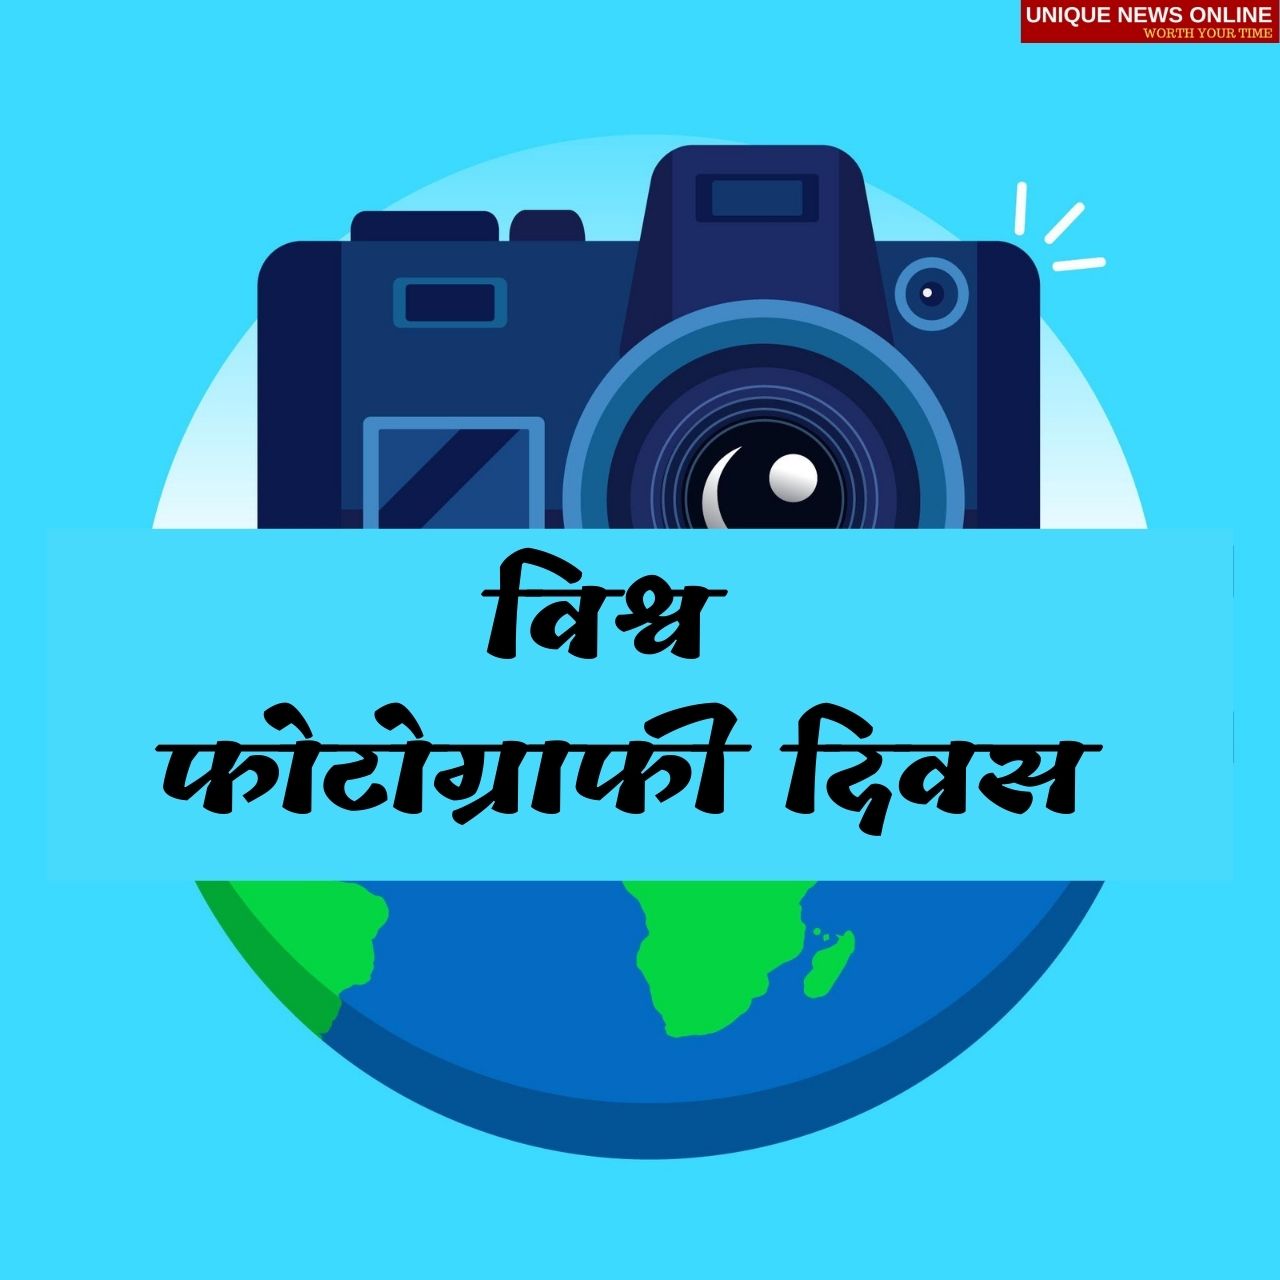 World Photography Day 2021 Hindi Wishes, Messages, Greetings, Quotes, Shayari, and HD Images for Photographers